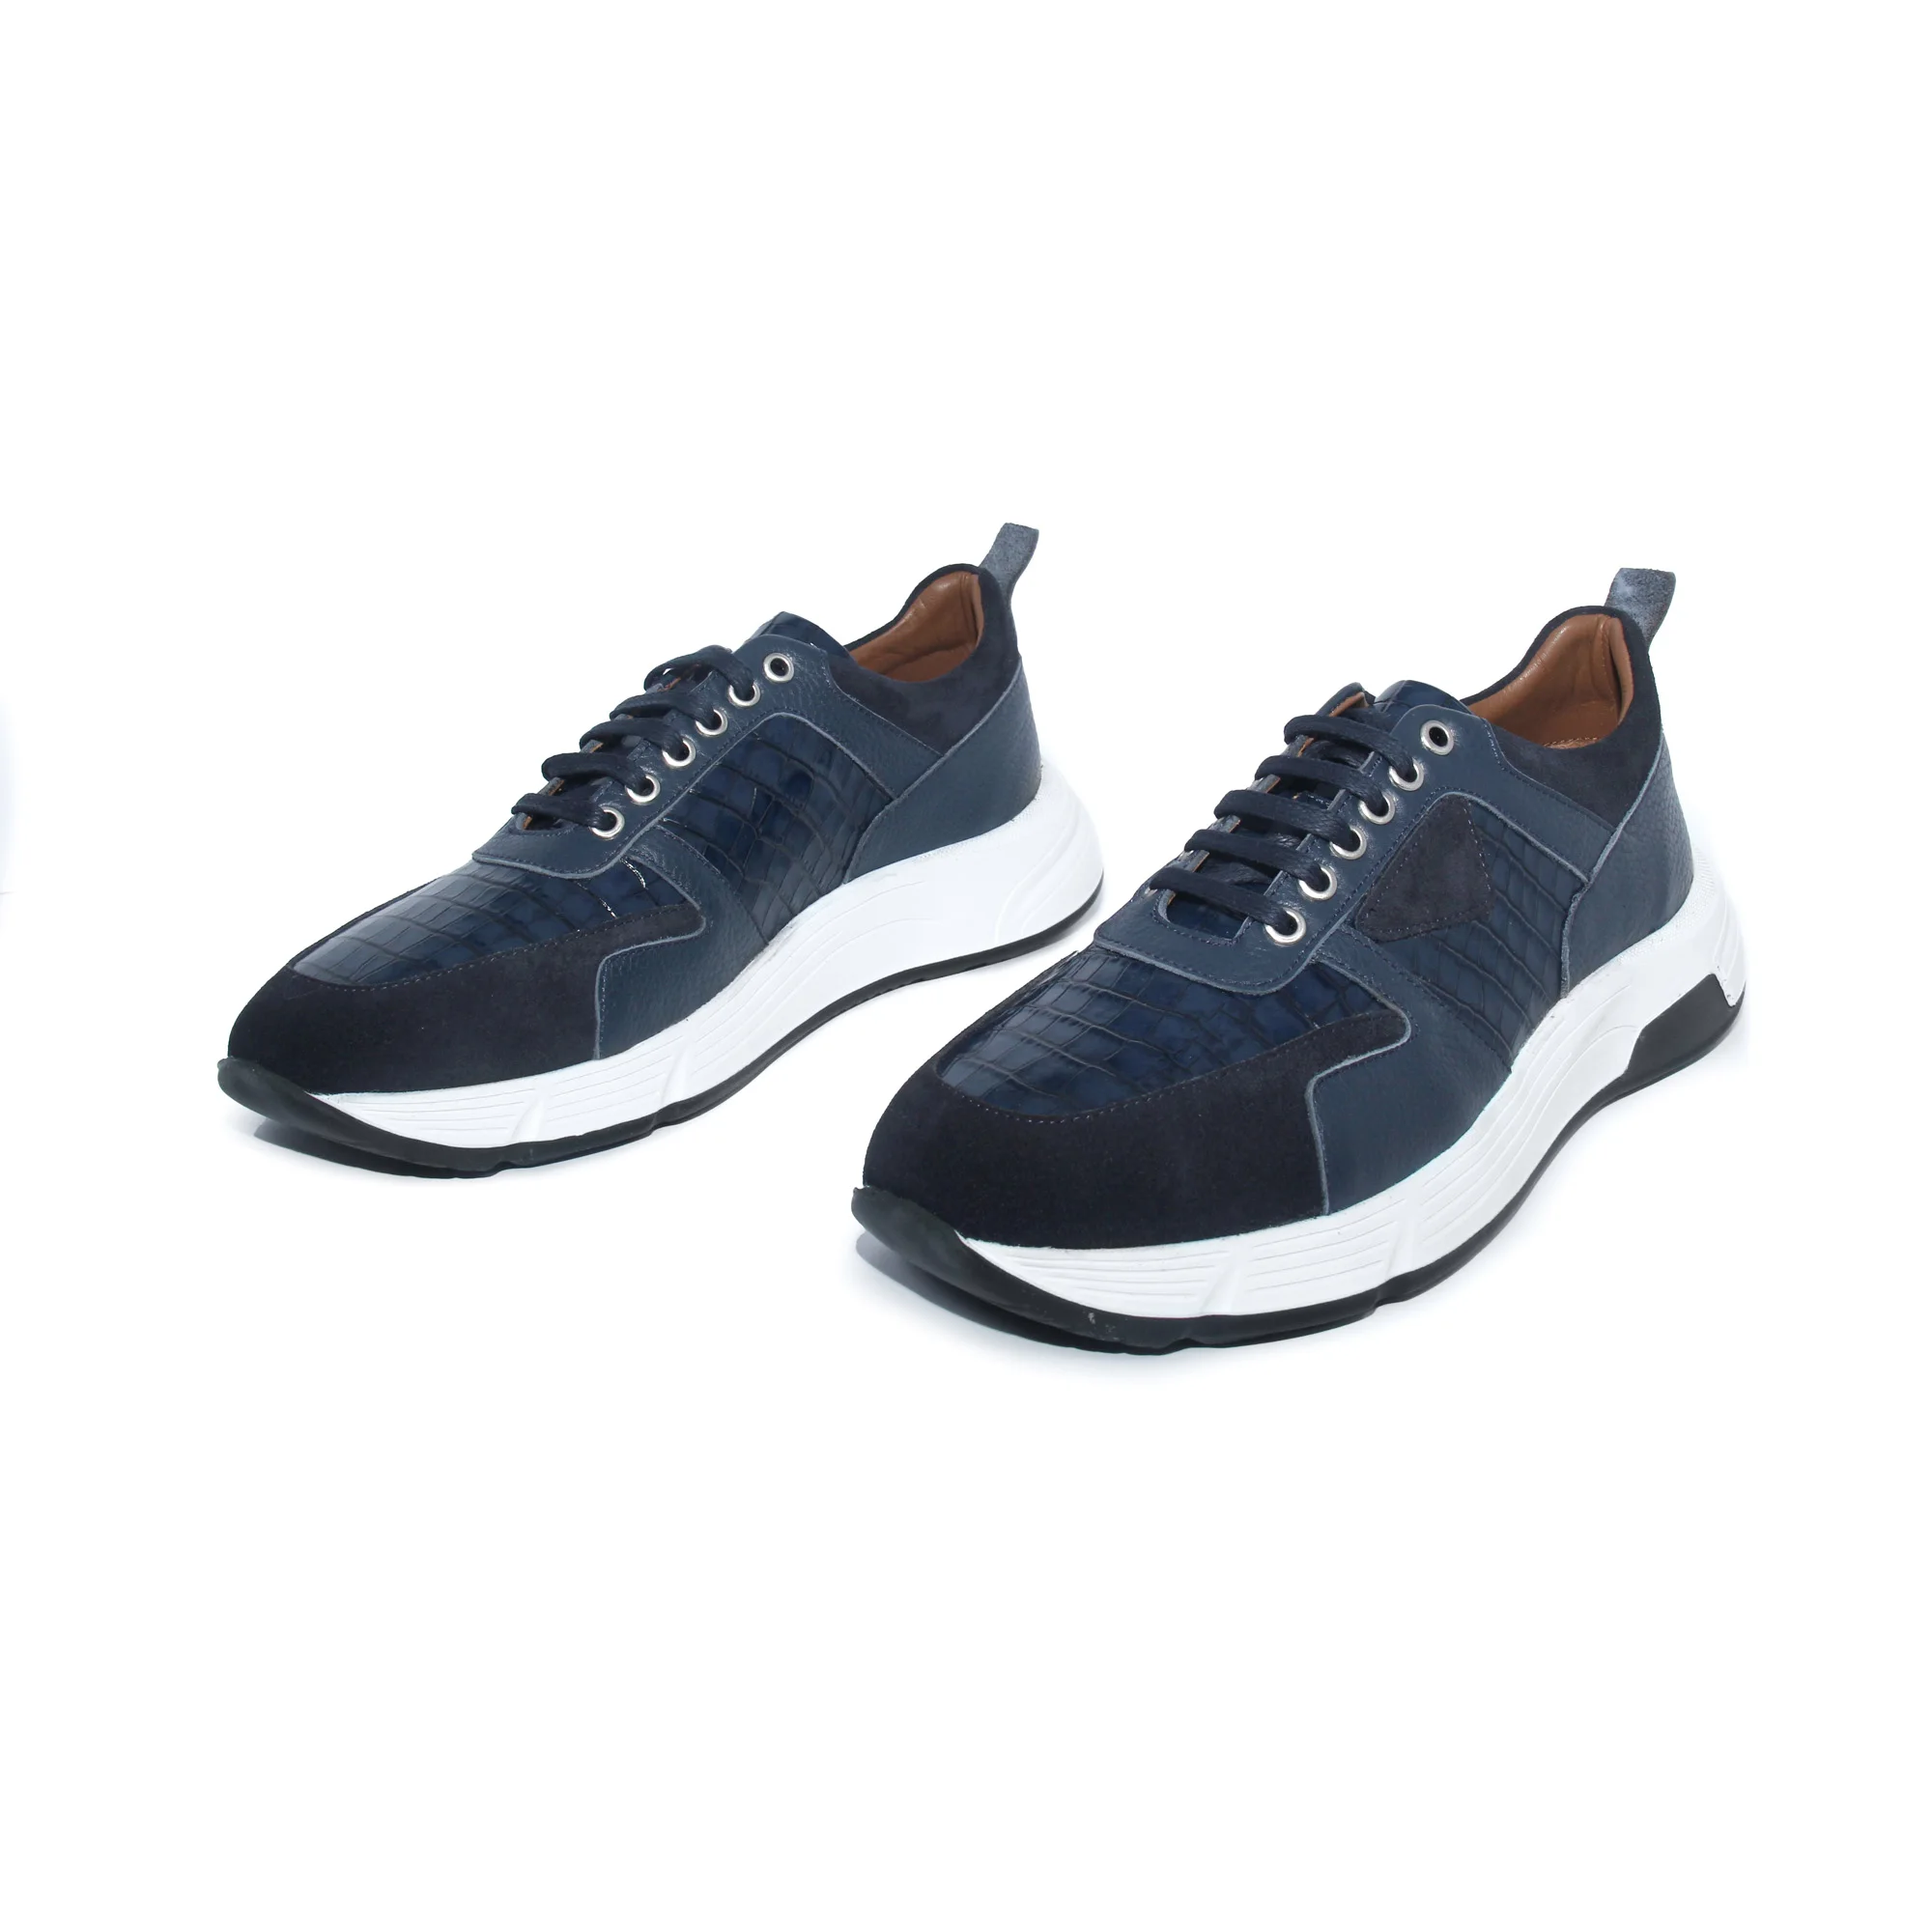 

Handmade Dark Blue Sport Sneakers Croco Alligator Patterned Calf Leather & Suede, Leather Insole, Men's Comfort Running Shoes